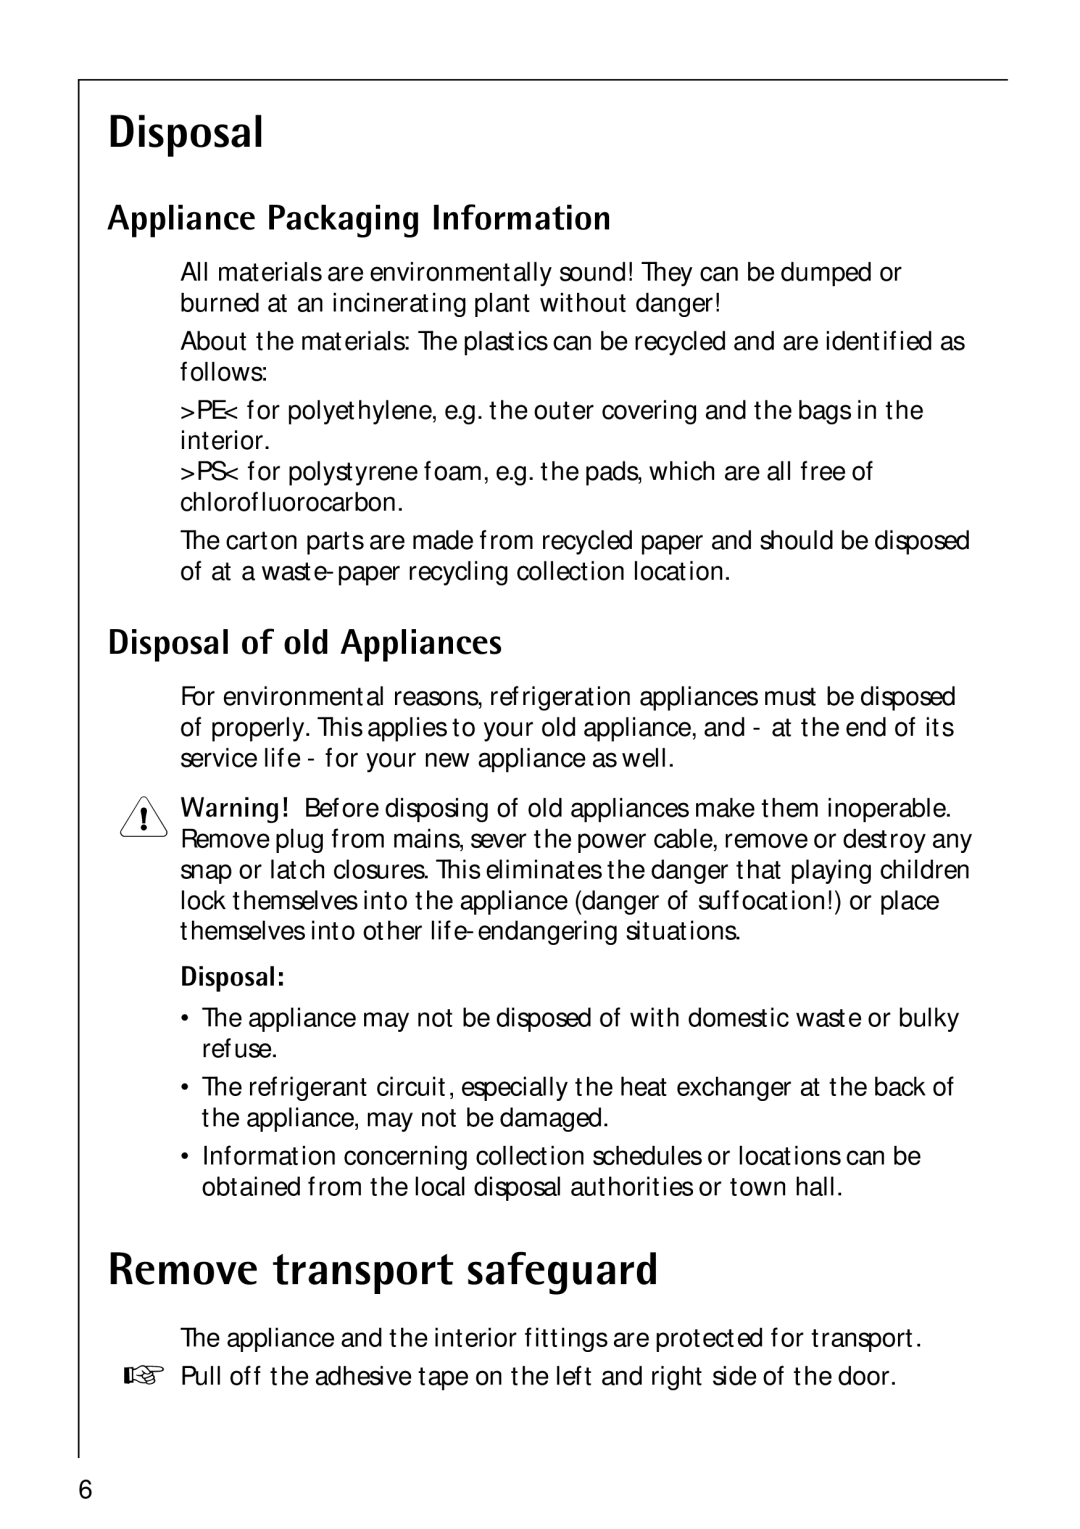 Electrolux Santo 1573TK-4 operating instructions Disposal, Remove transport safeguard, Appliance Packaging Information 